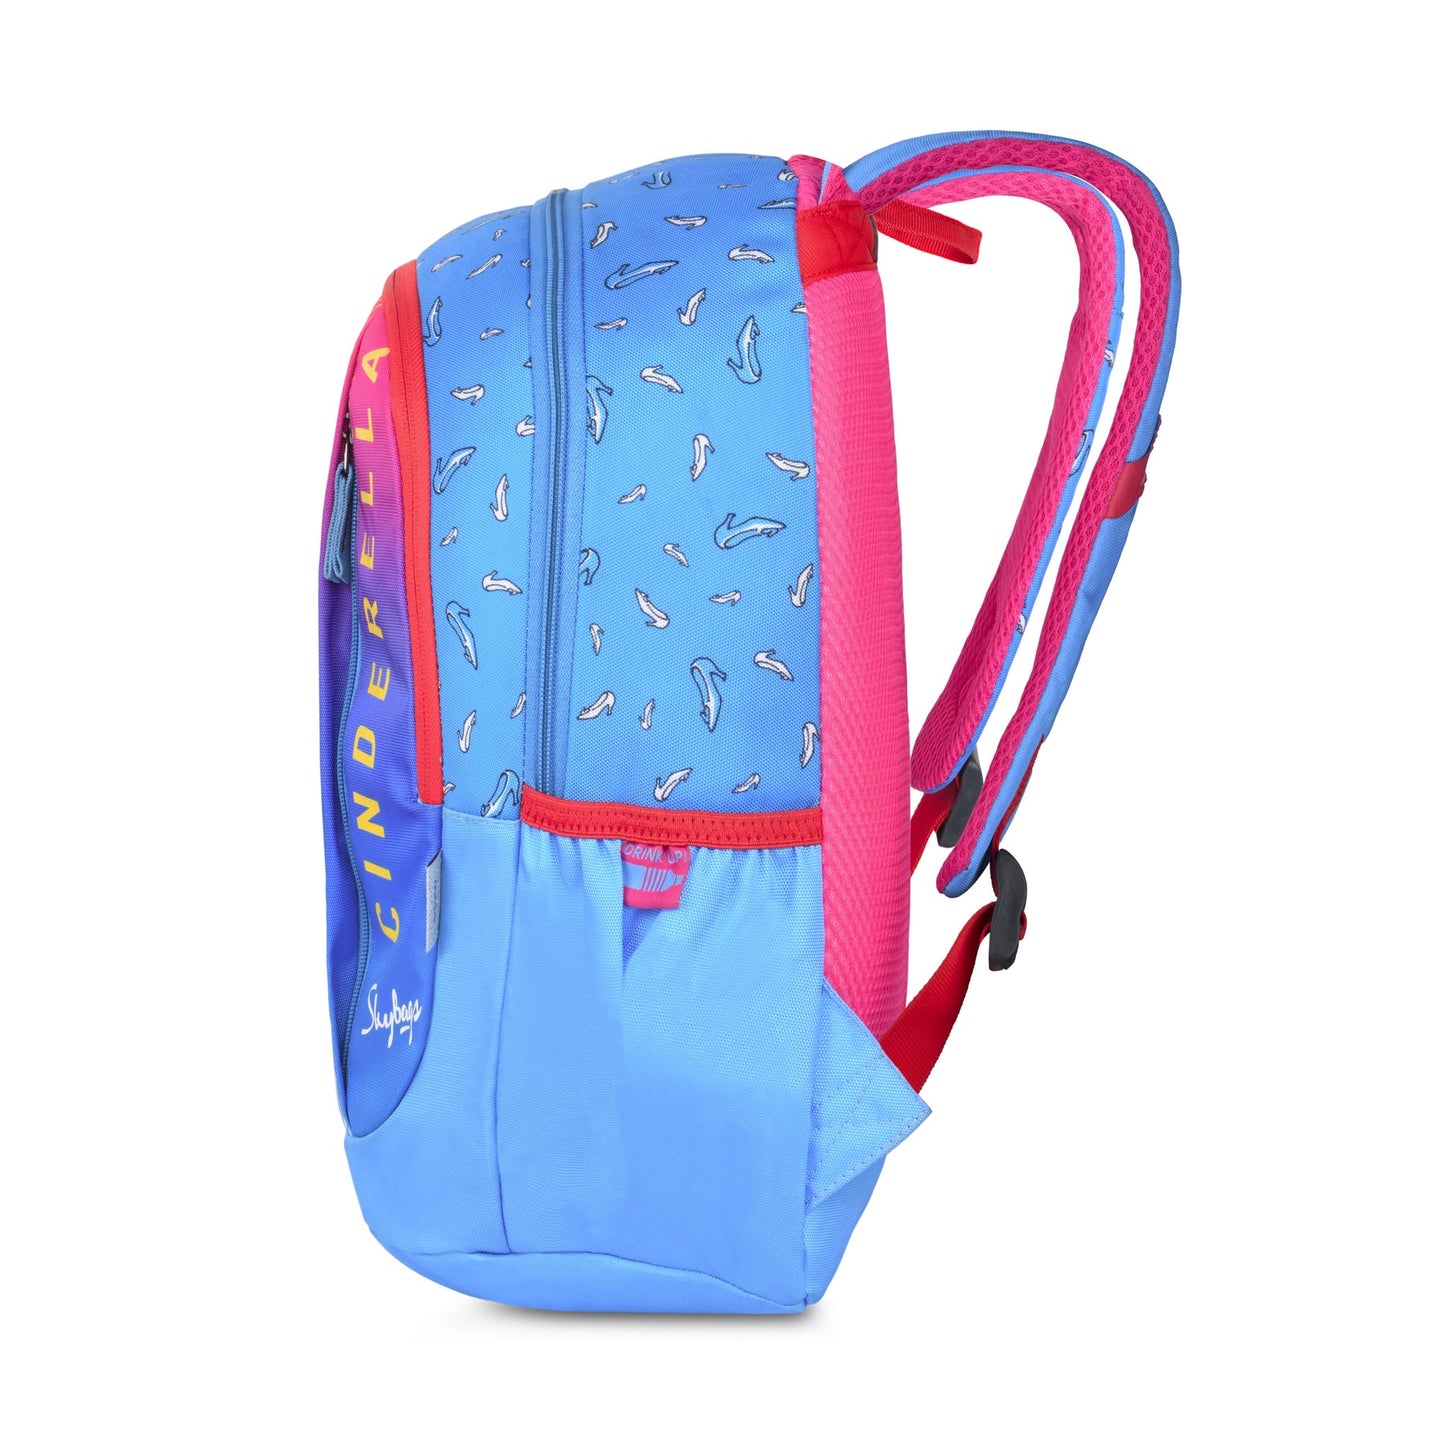 Skybags Cinderella Champ 01 23L Backpack